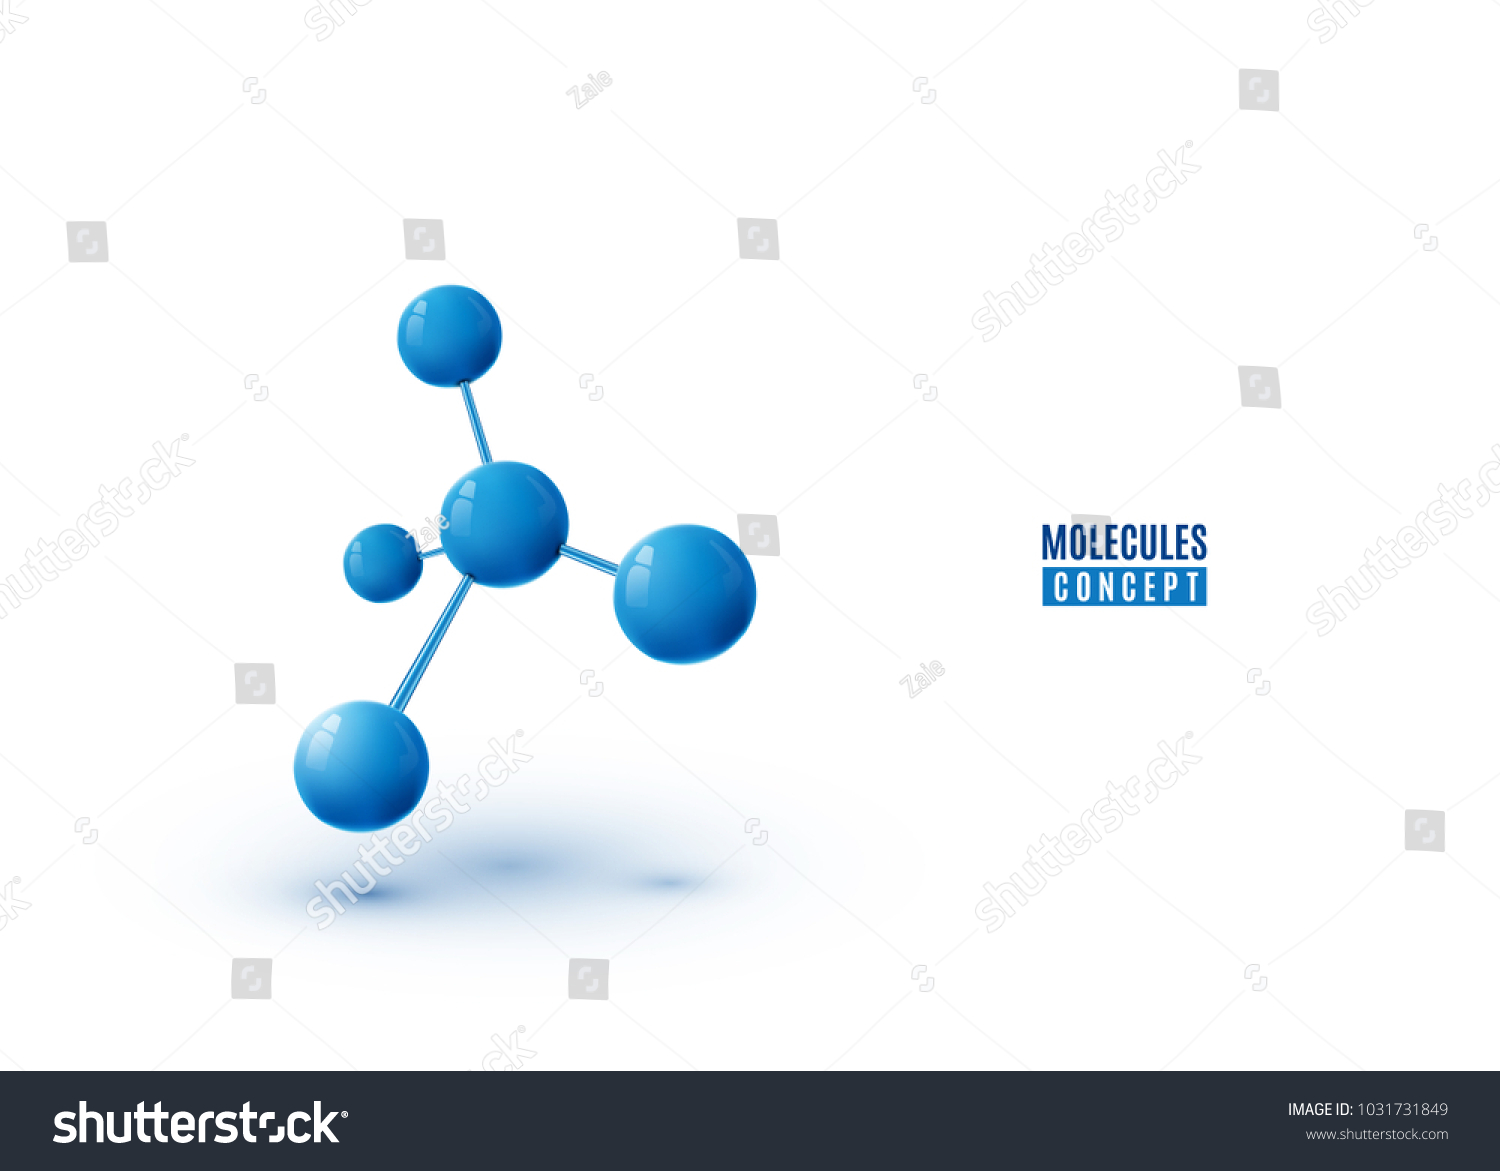 Molecule design isolated on white background. Atoms. 3d molecular structure with blue connected spherical particles. Vector illustration #1031731849